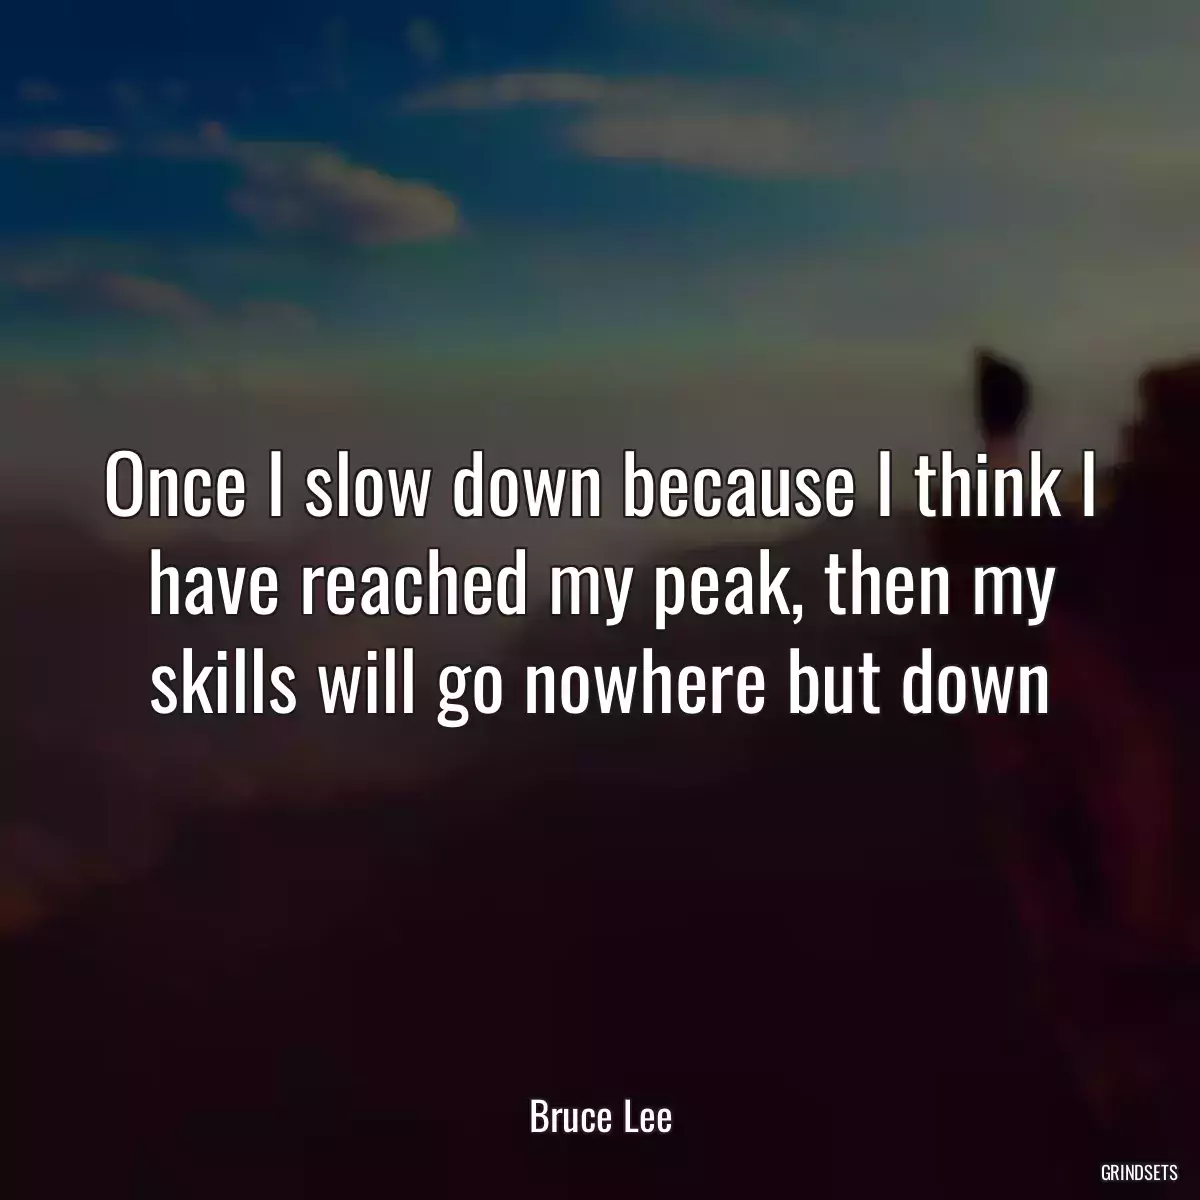 Once I slow down because I think I have reached my peak, then my skills will go nowhere but down